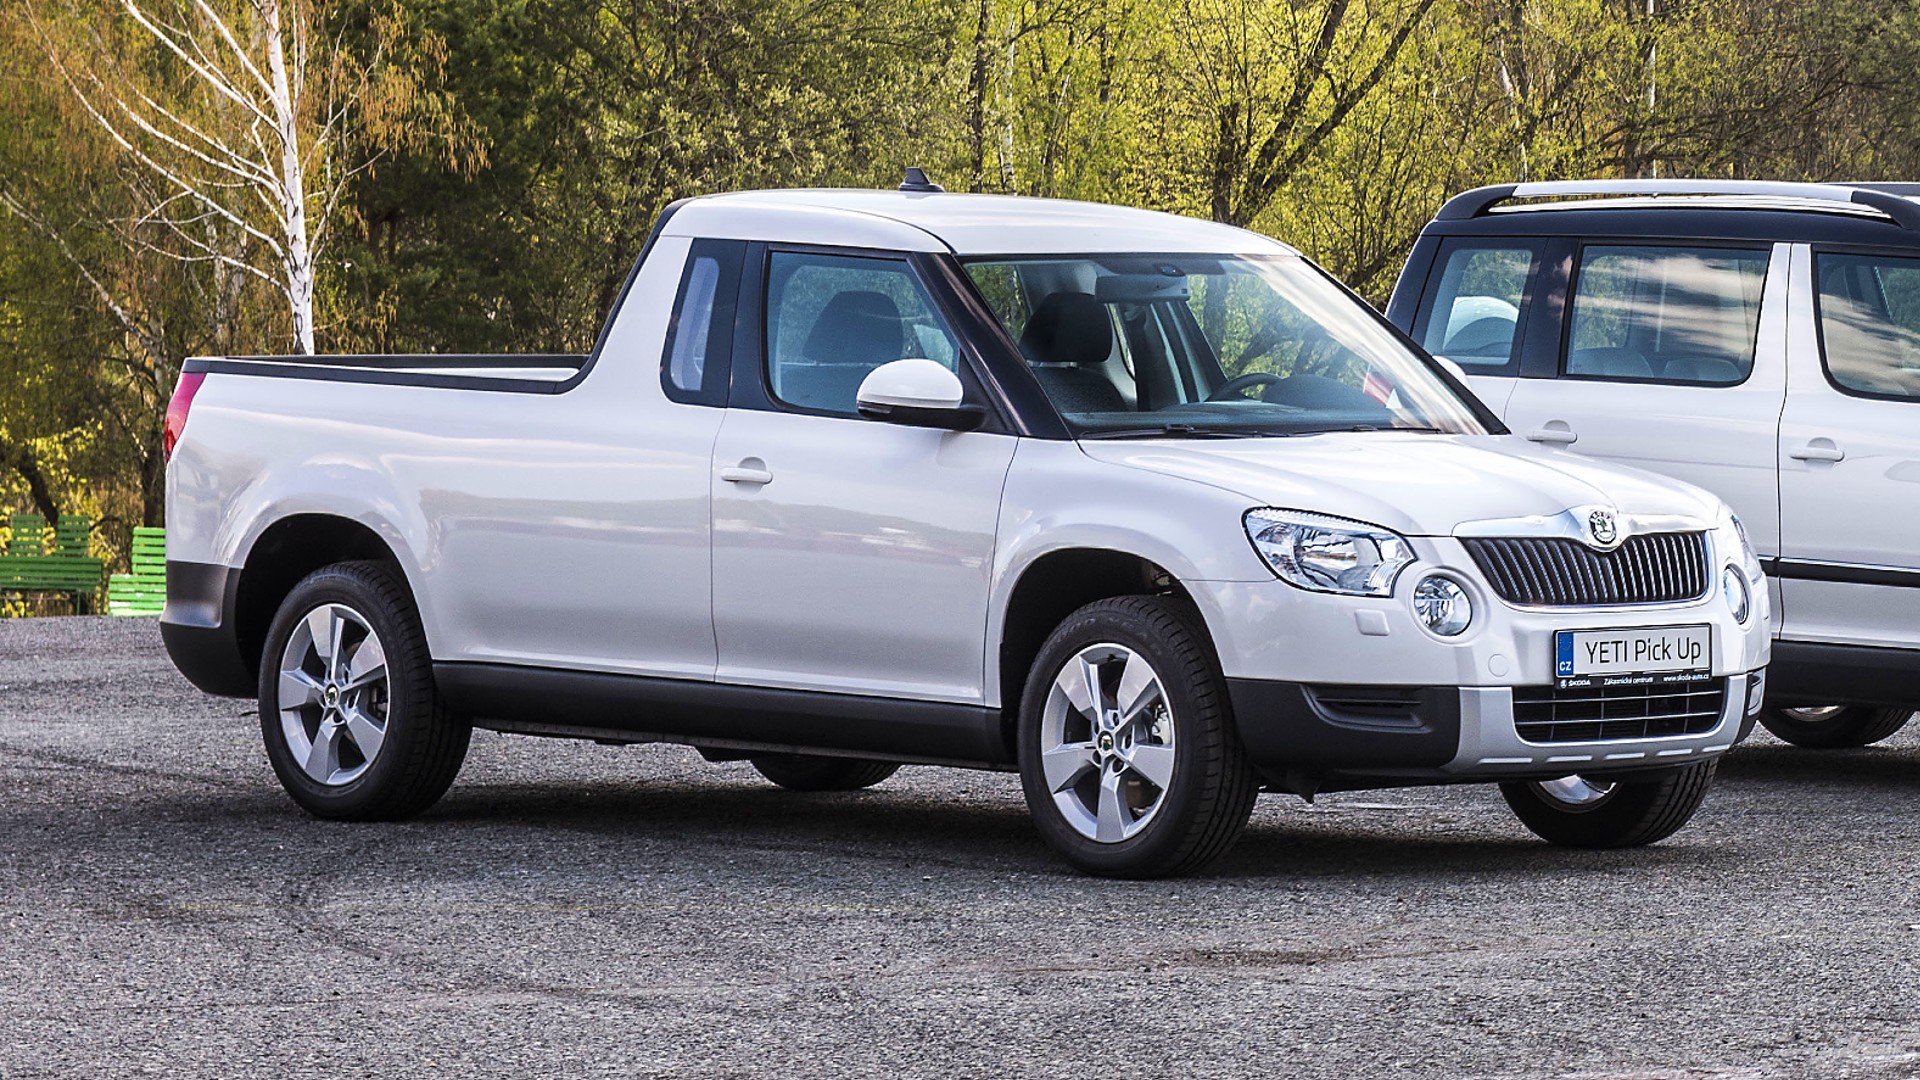 Quirky Skoda Yeti Pickup Exists In One-Off Prototype Form